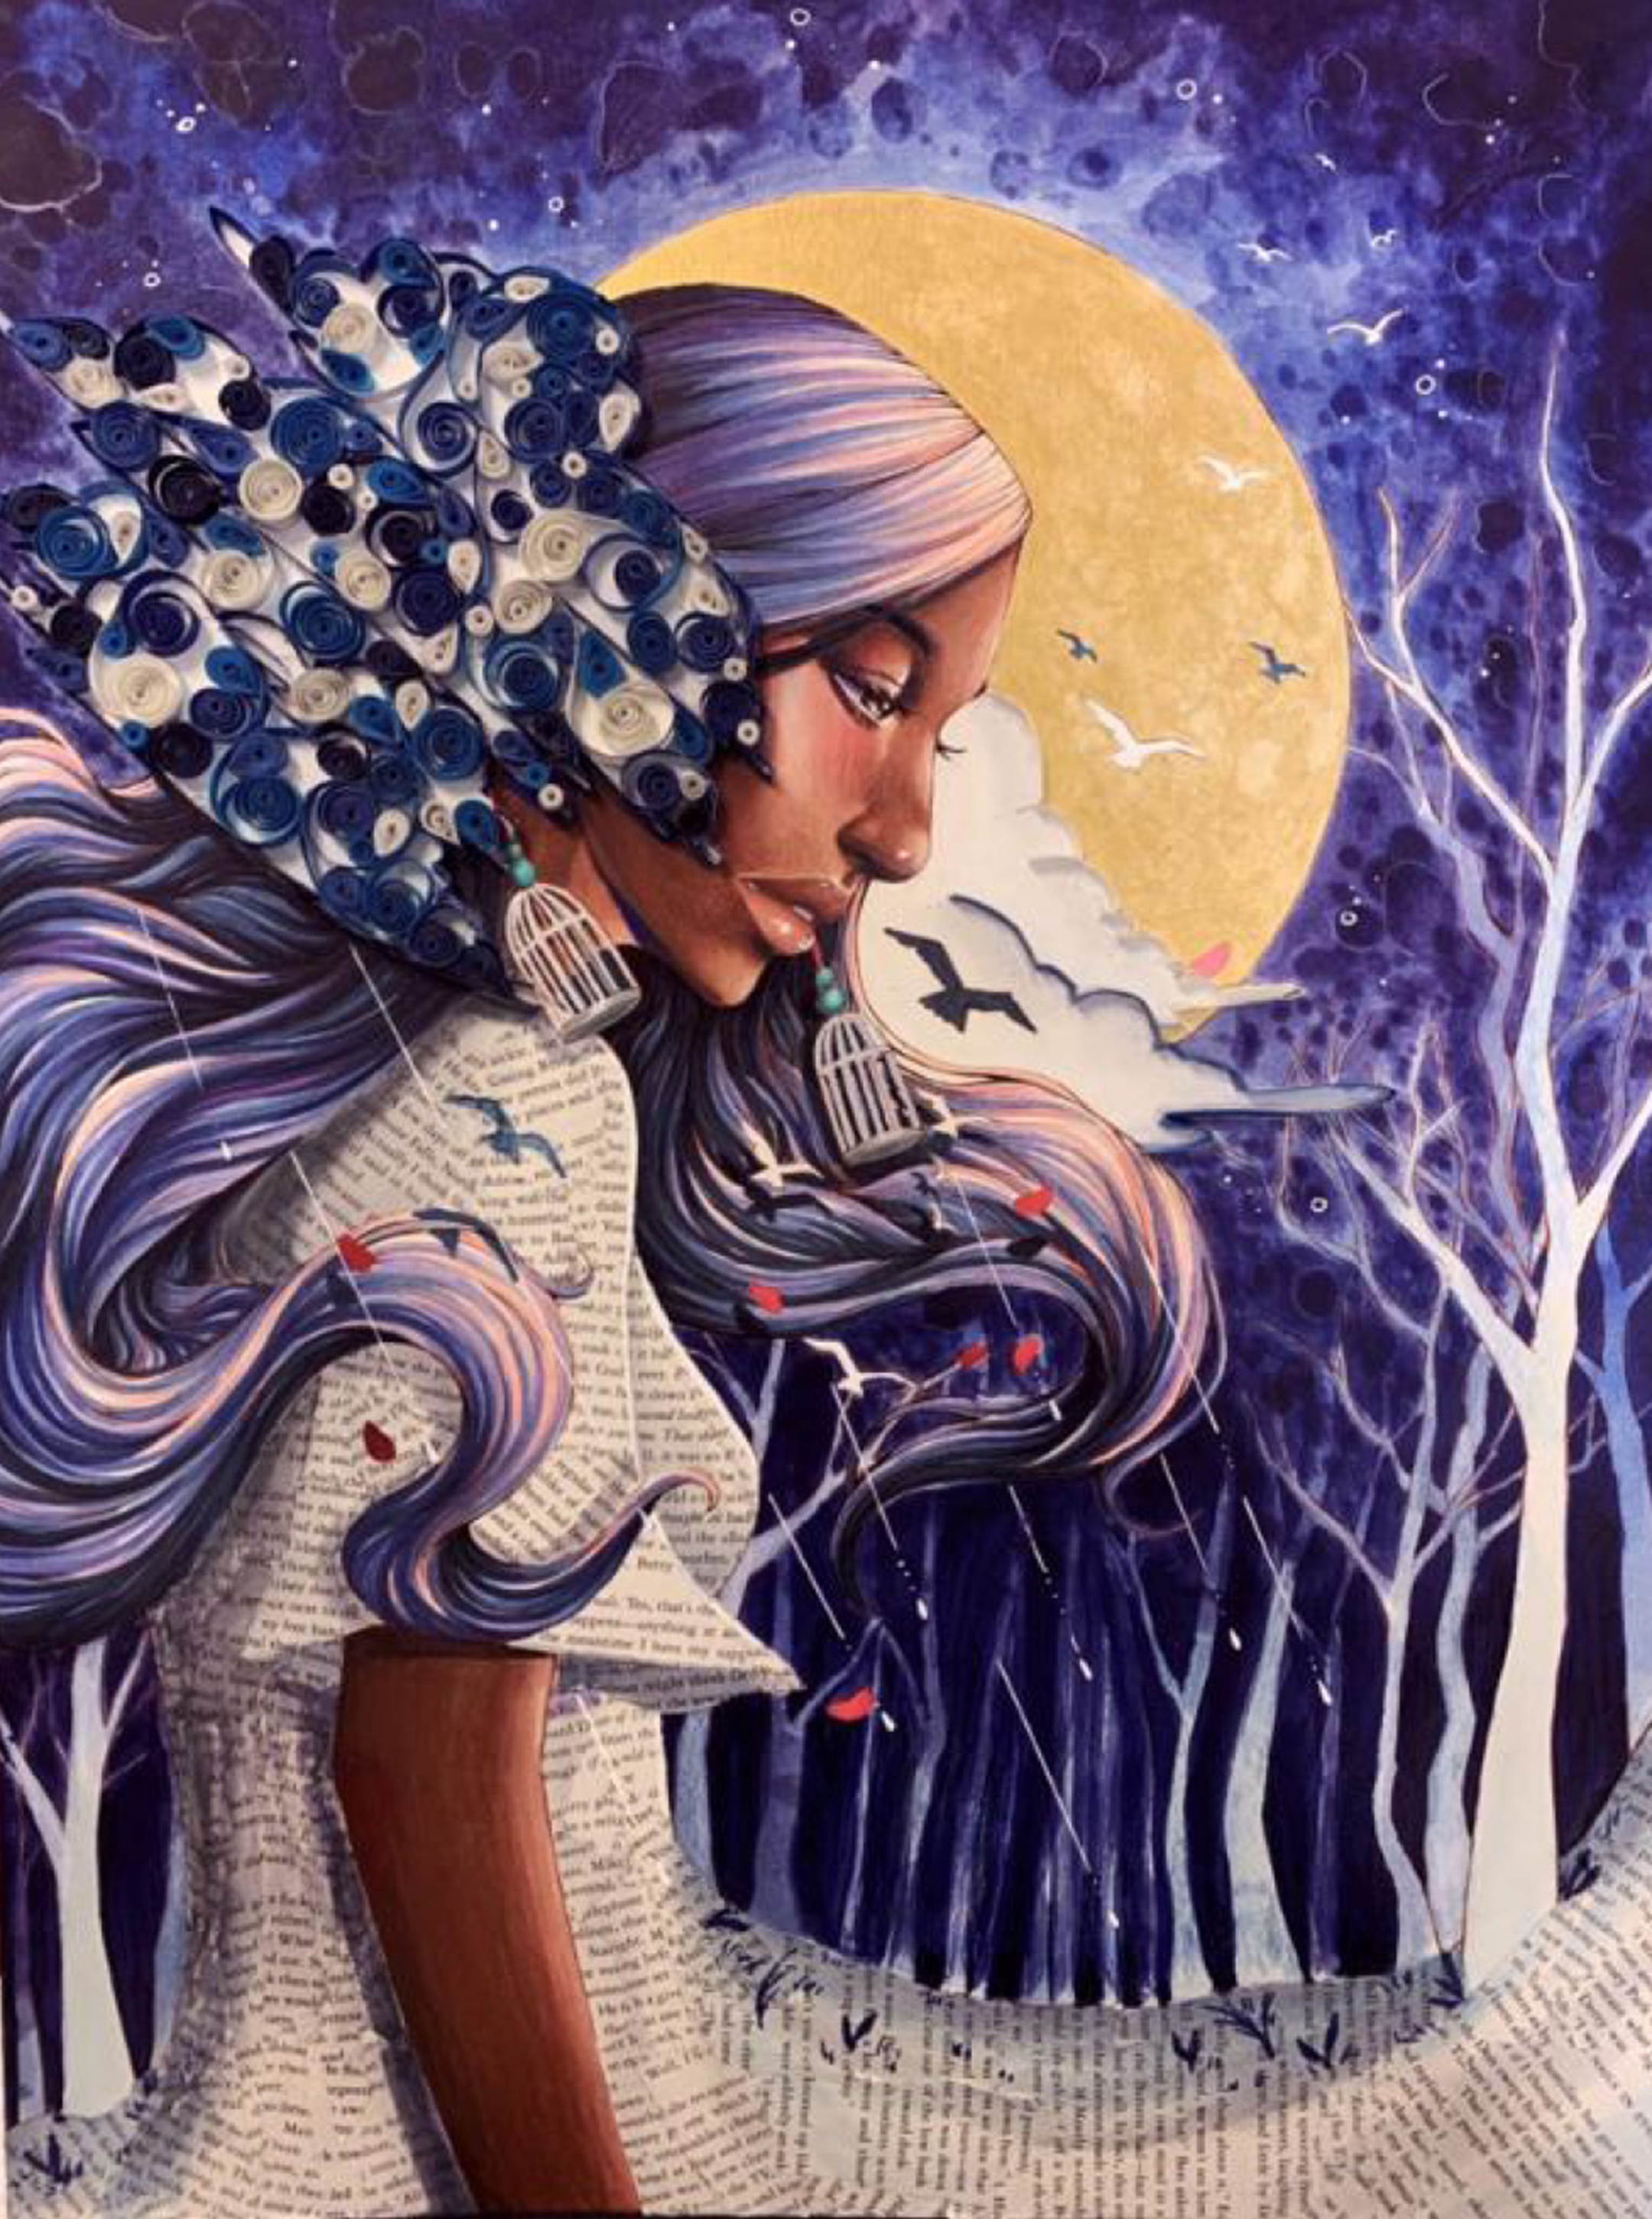 Painting of a young Black woman with purple hair, looking down while walking in a forest at night